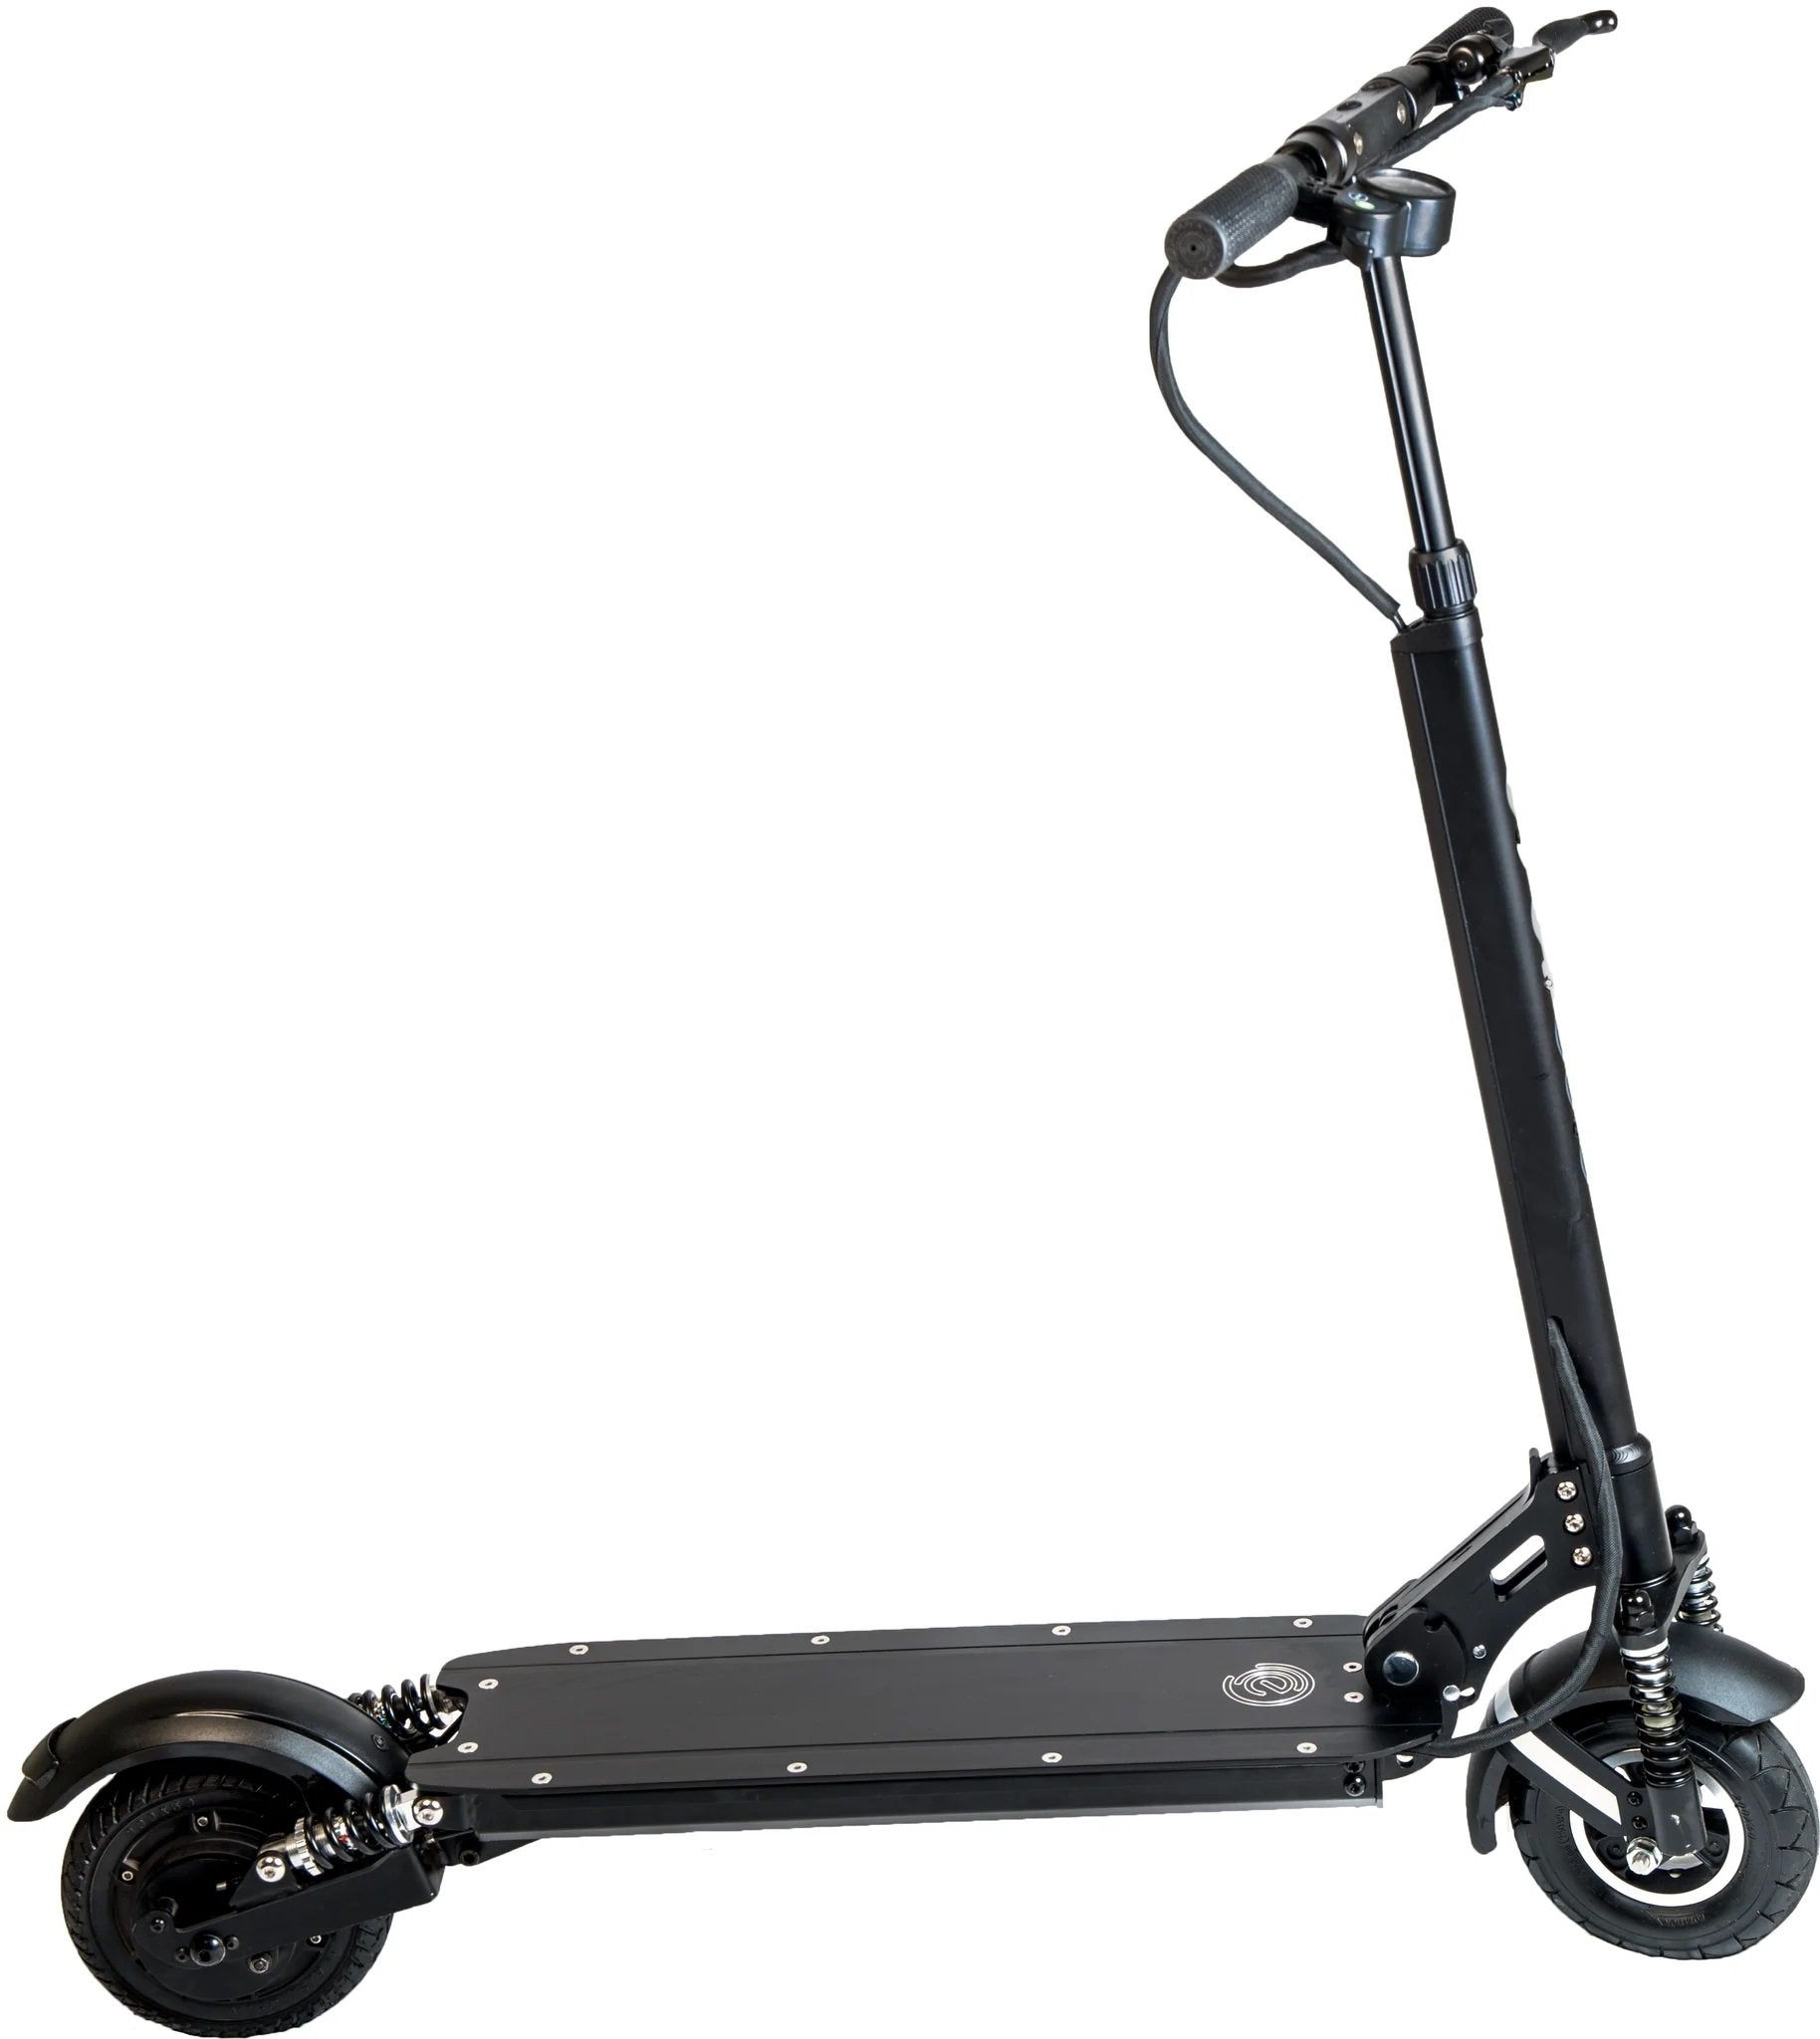 Ecoreco L5+ 11Ah Folding Lithium Rear Suspension Electric Scooter